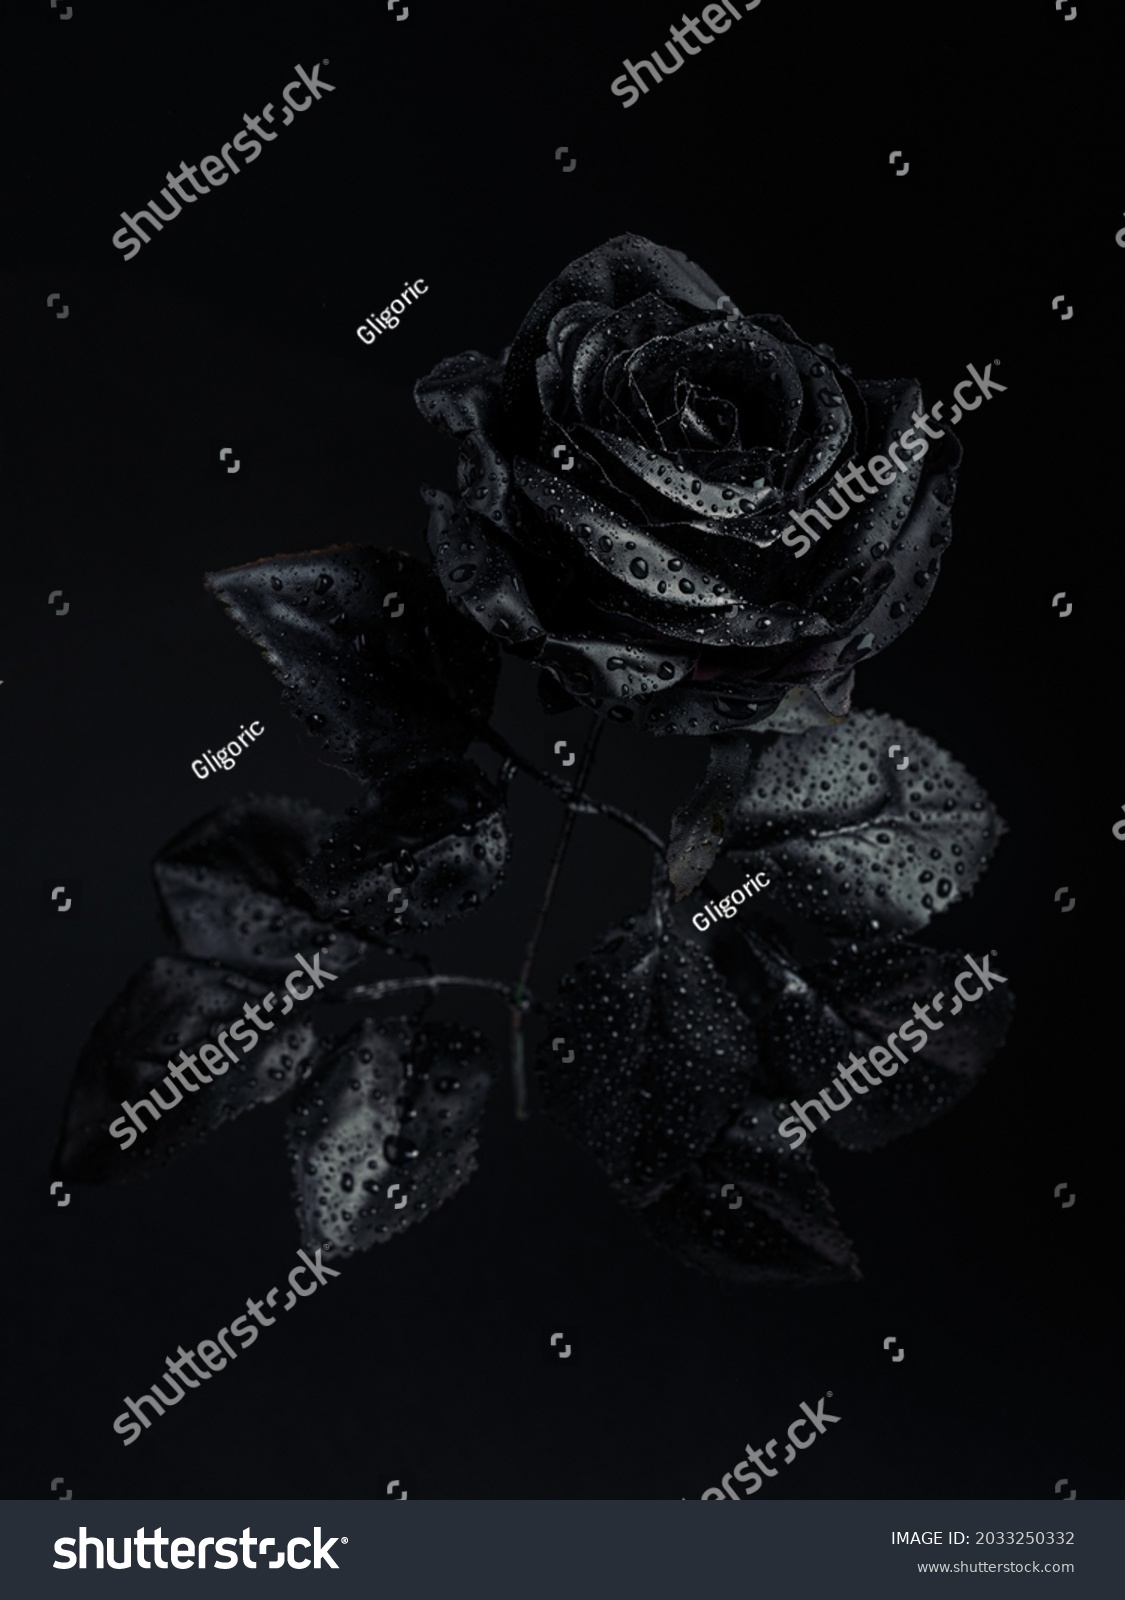 Black rose with drops of water on a black background. Creative romantic love and passion concept. dark and spooky cult aesthetic. Floral Halloween or Santa Muerte idea. #2033250332